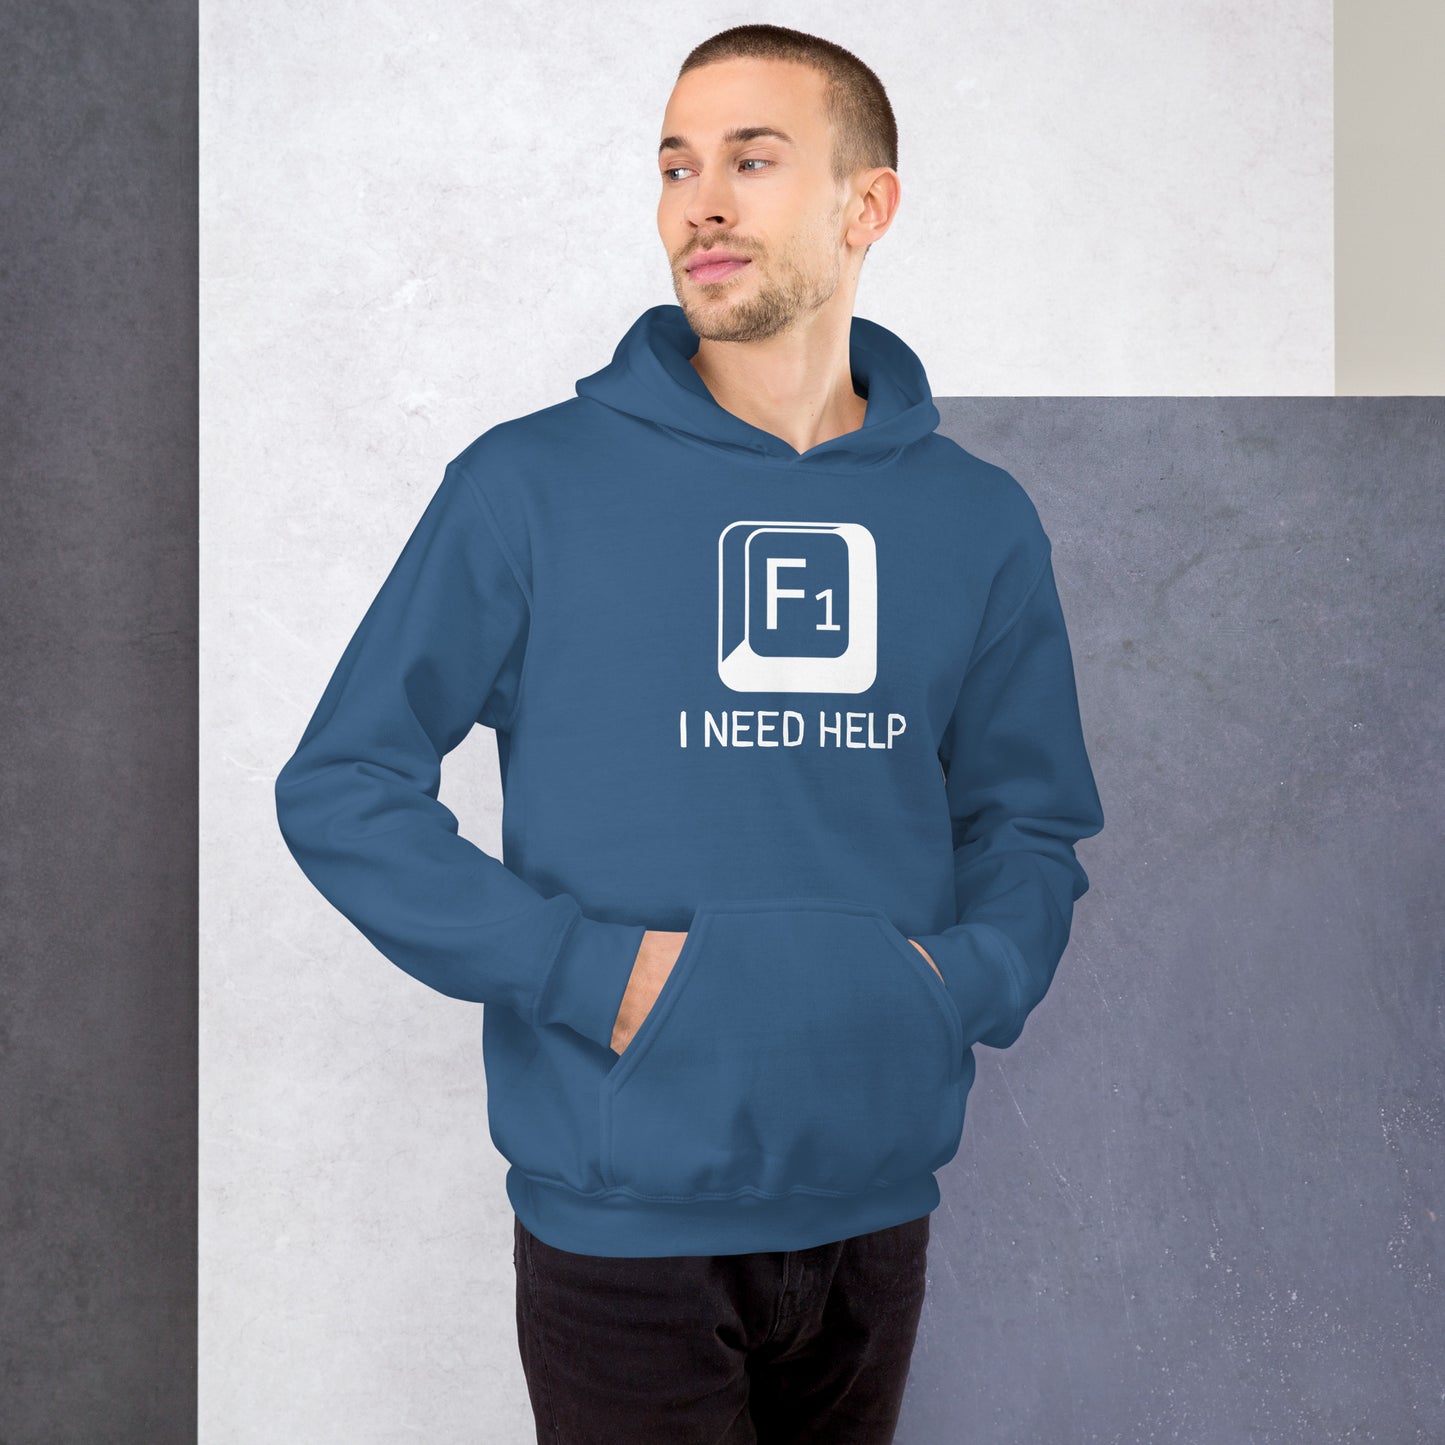 Men with indigo blue hoodie and a picture of F1 key with text "I need help"